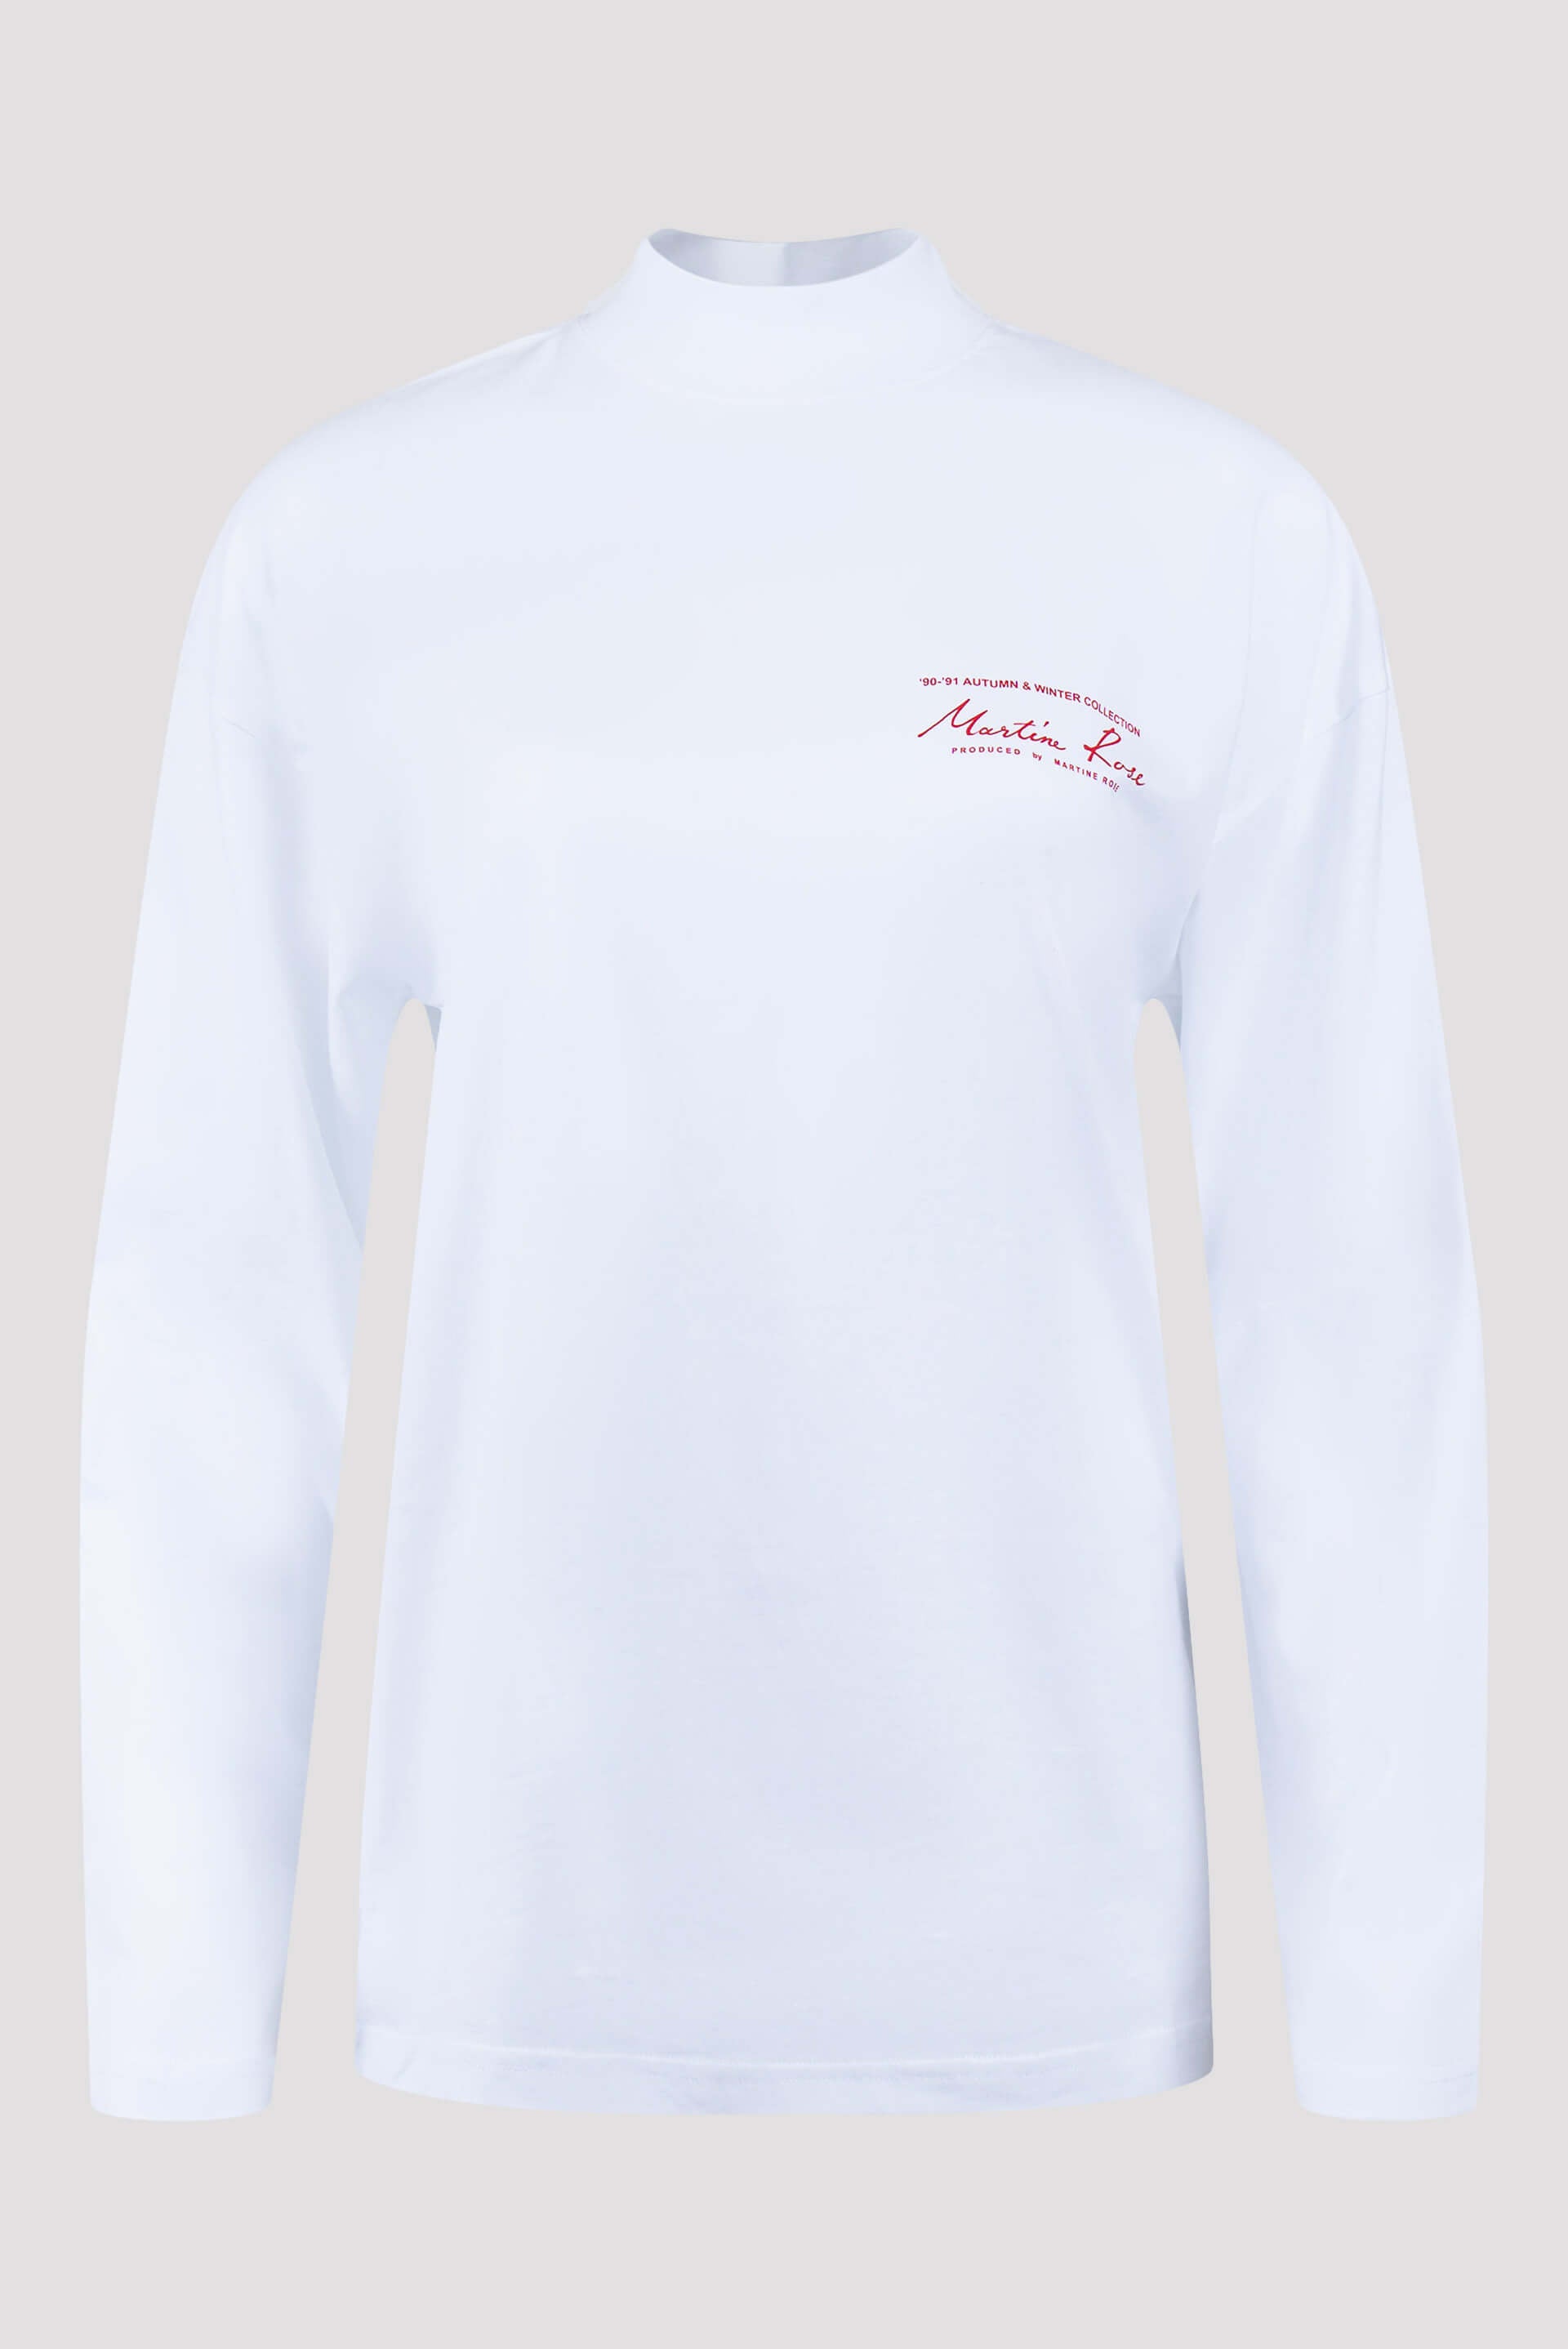 Martine Rose Logo Printed Funnel Neck T-shirt - Fabric of Society